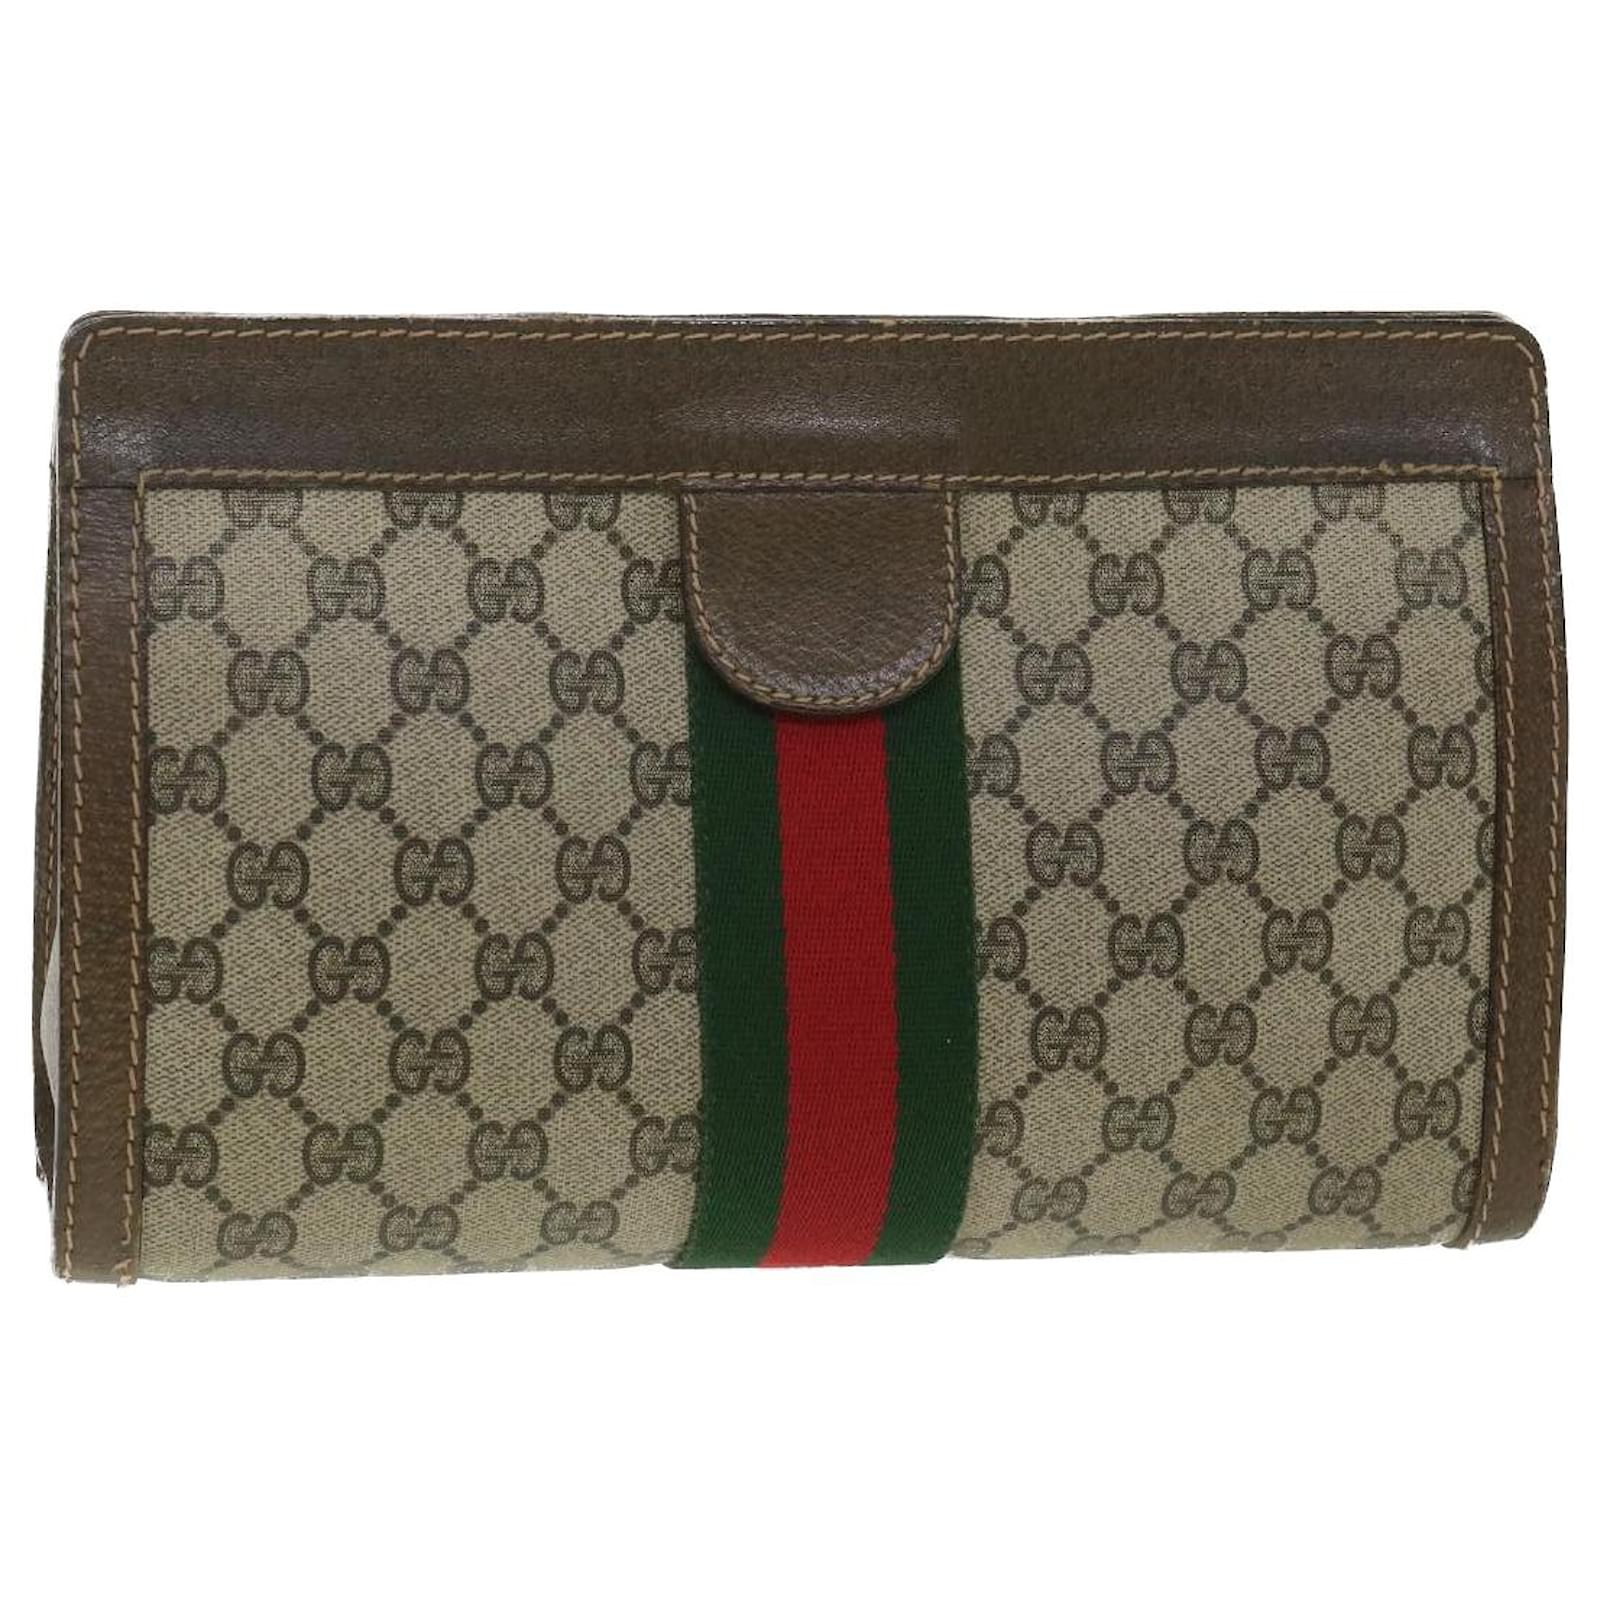 GUCCI GG Canvas Web Sherry Line Clutch Bag Beige Red Green 010.378 auth ...